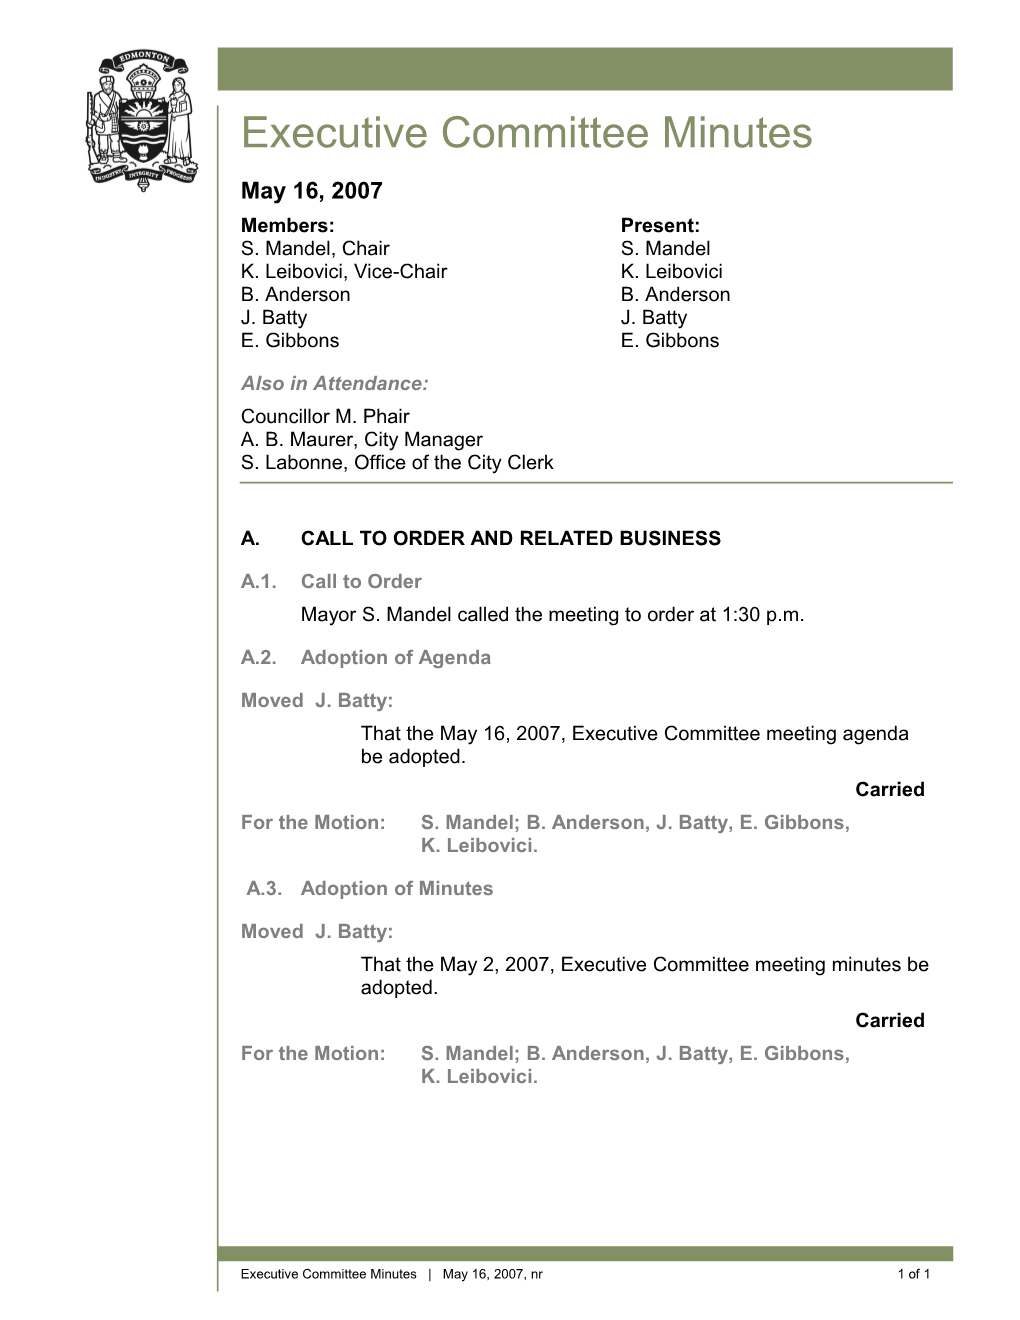 Minutes for Executive Committee May 16, 2007 Meeting